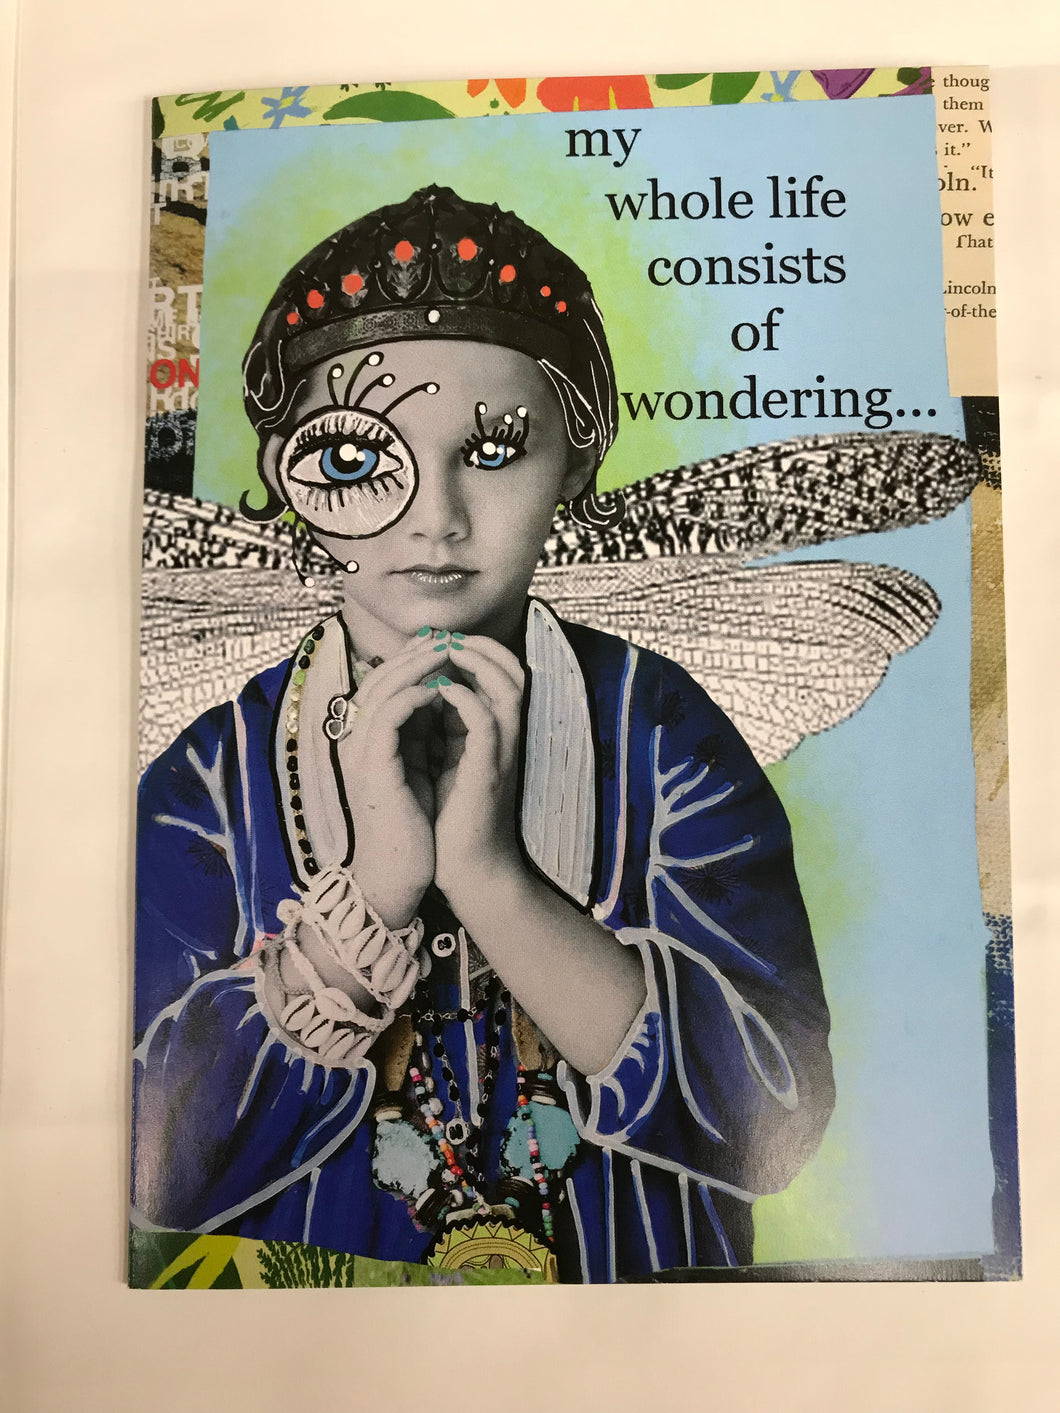 ' my whole life consists of wondering ... '   Greeting Card by Erin Smith